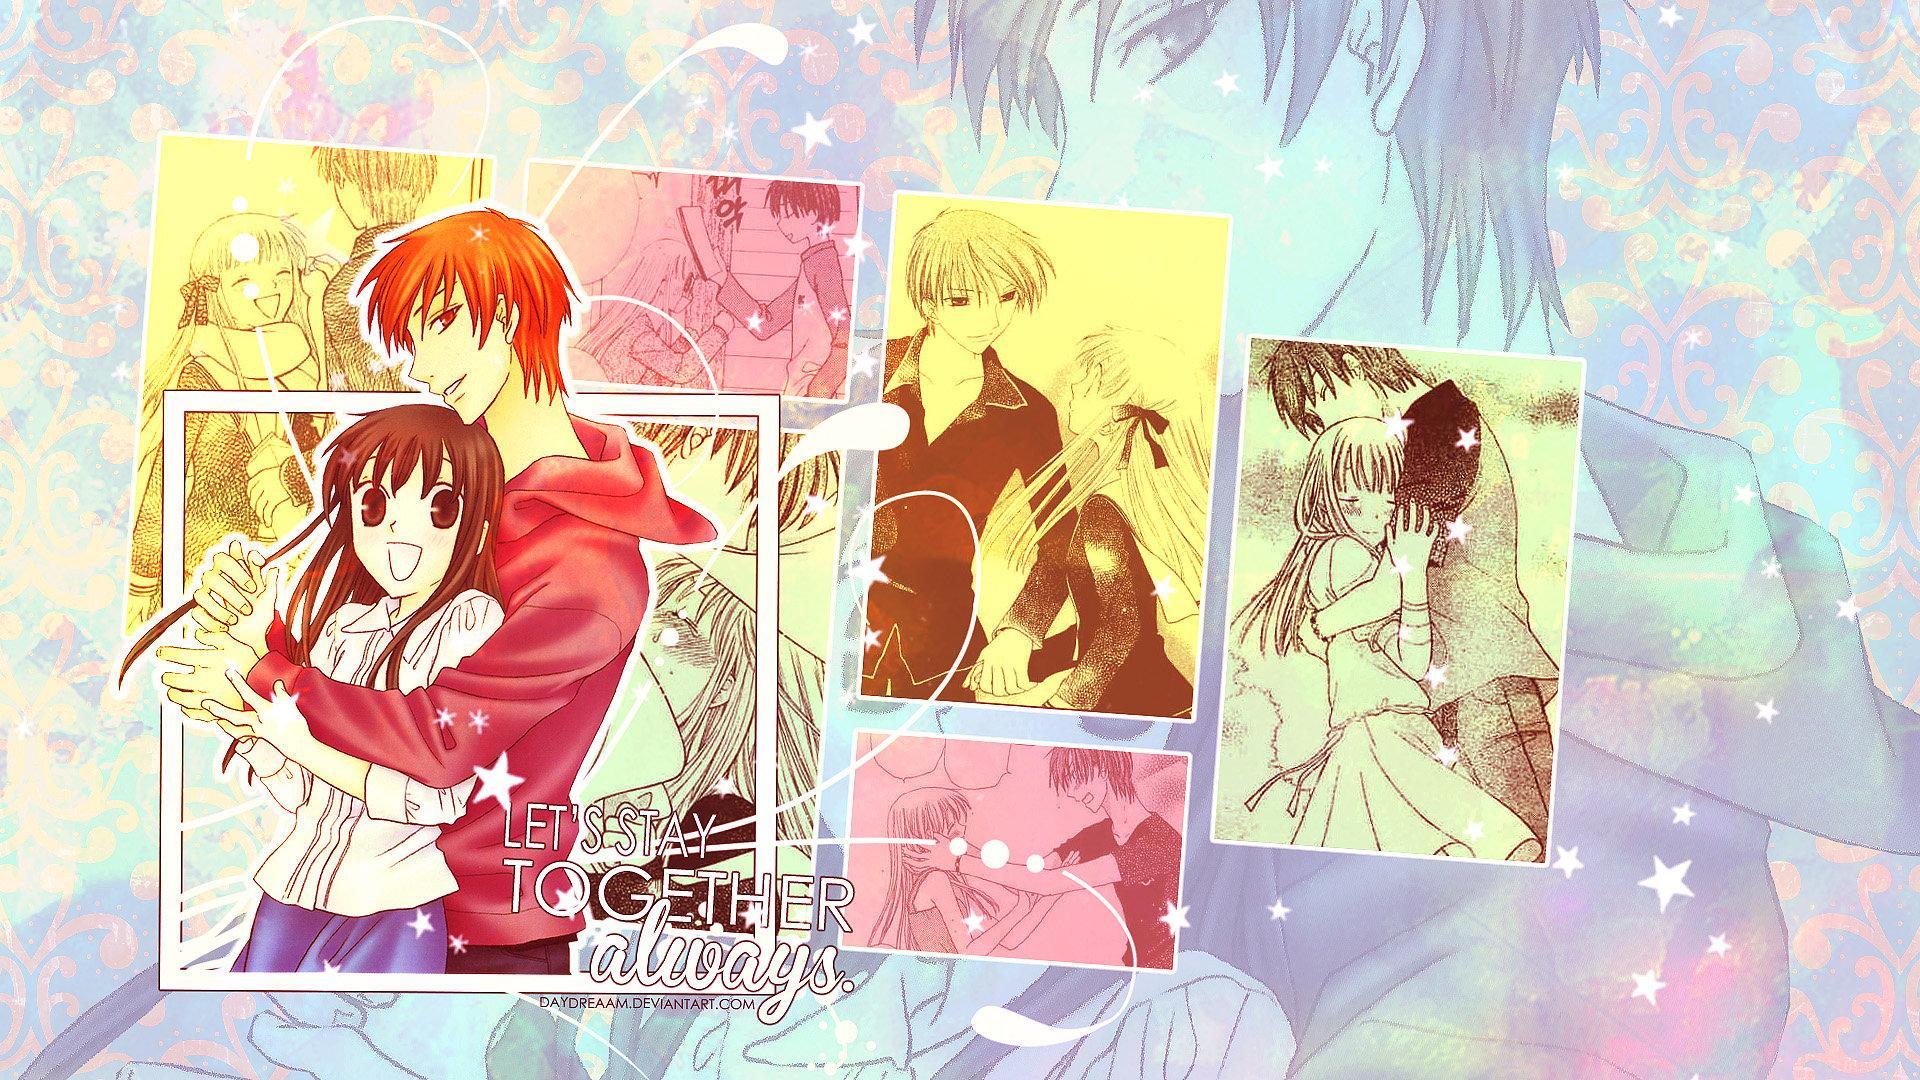 Fruits Basket The Final Review